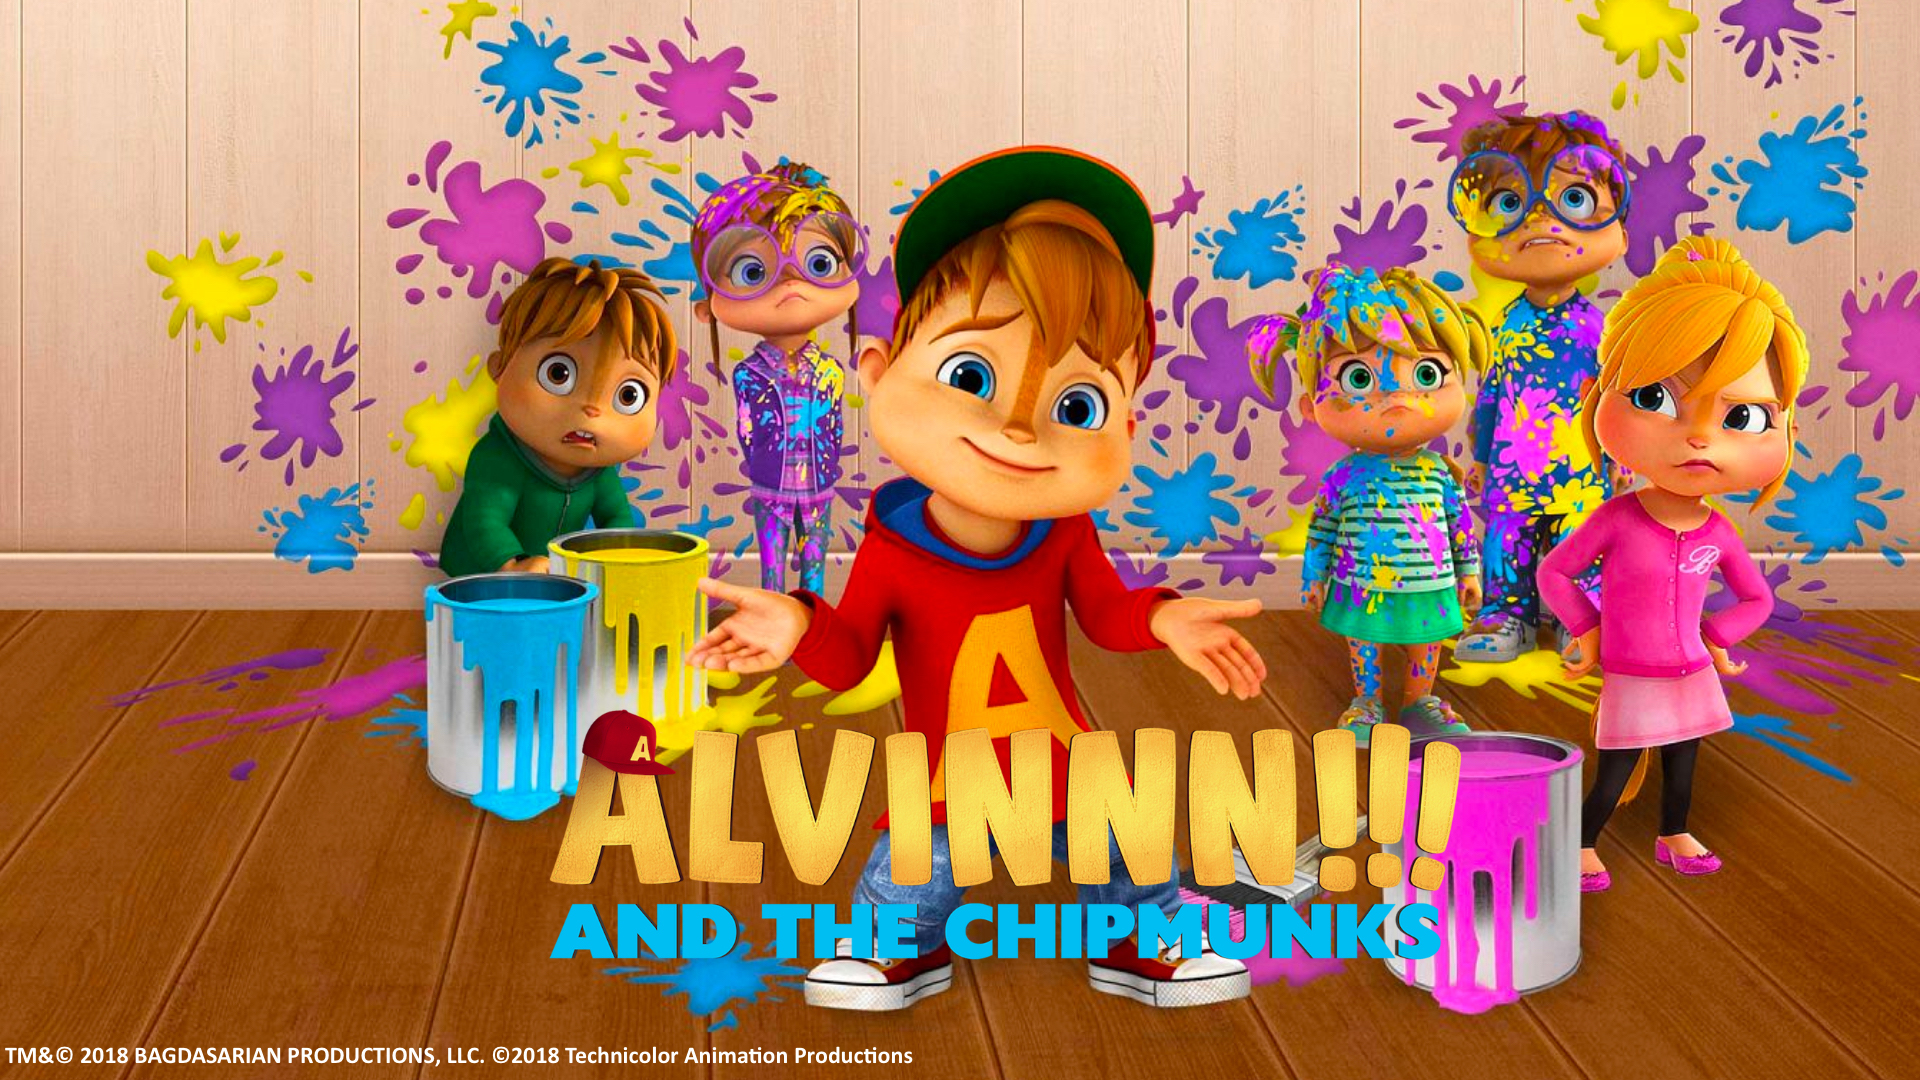 Alvin and the chipmunks getting head